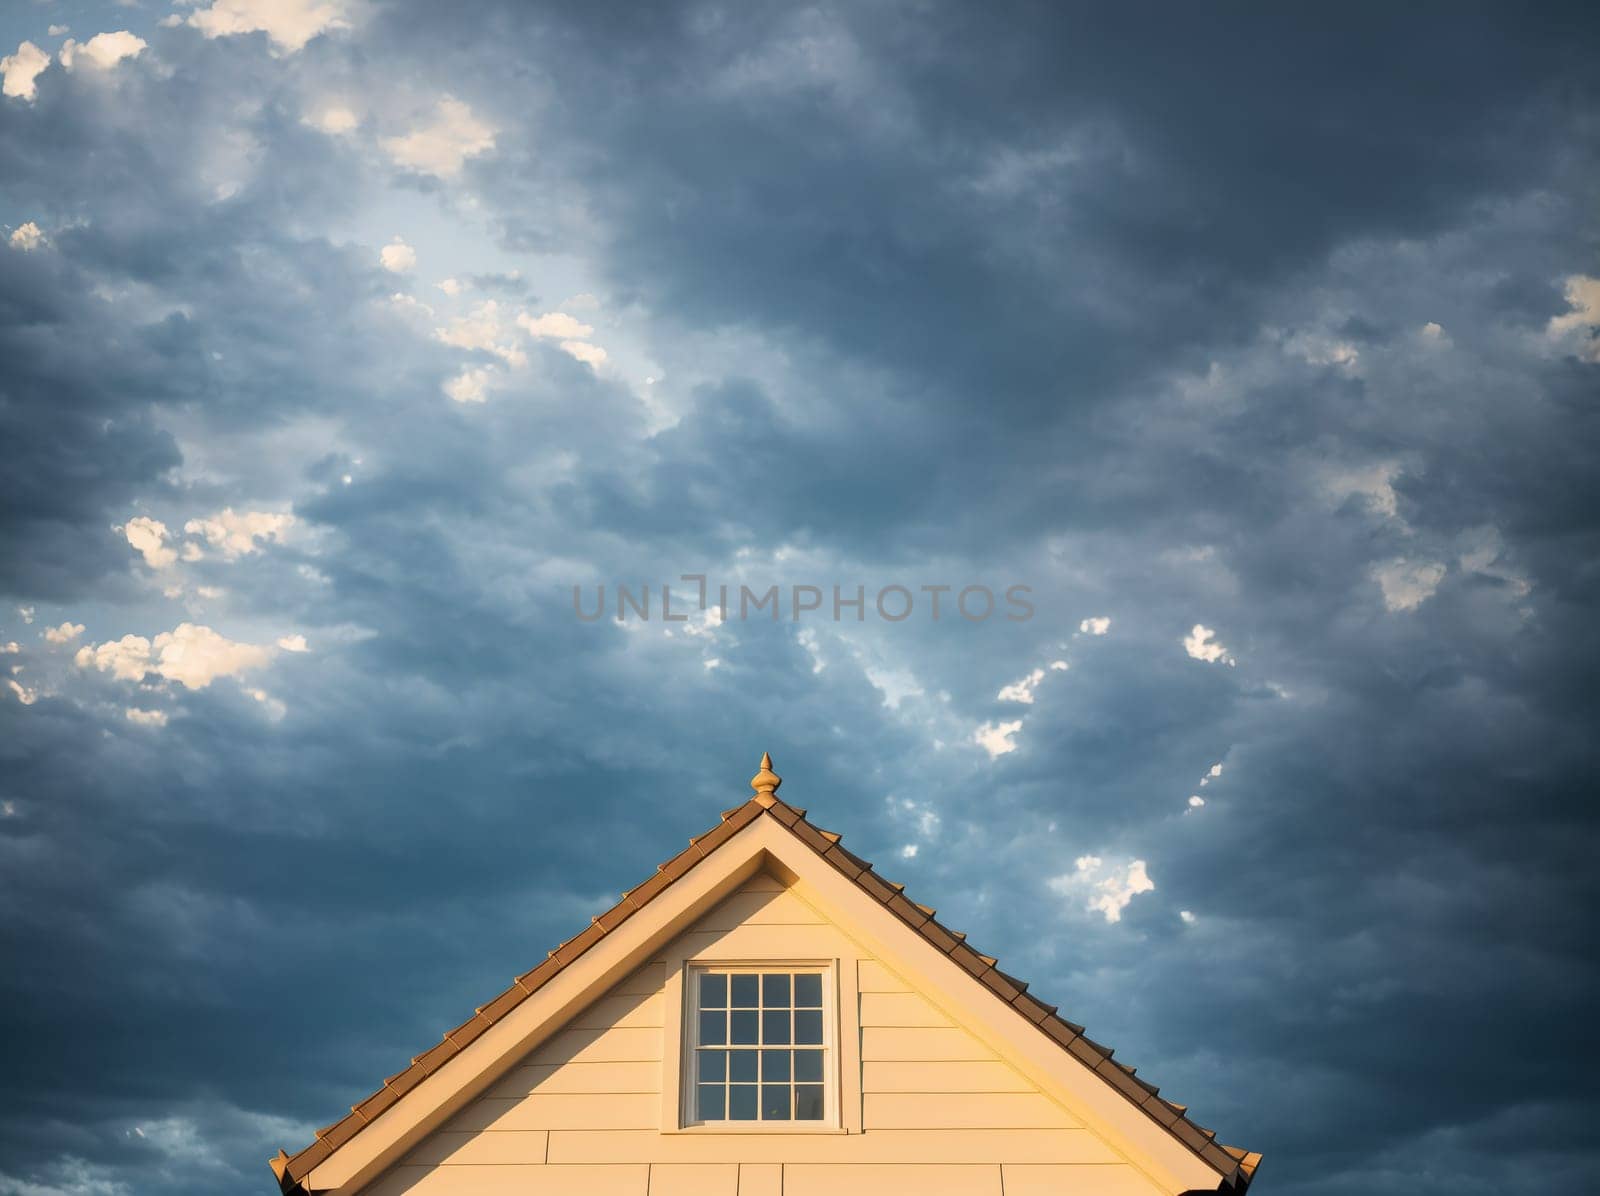 The image shows a small white house with a cloudy sky in the background.